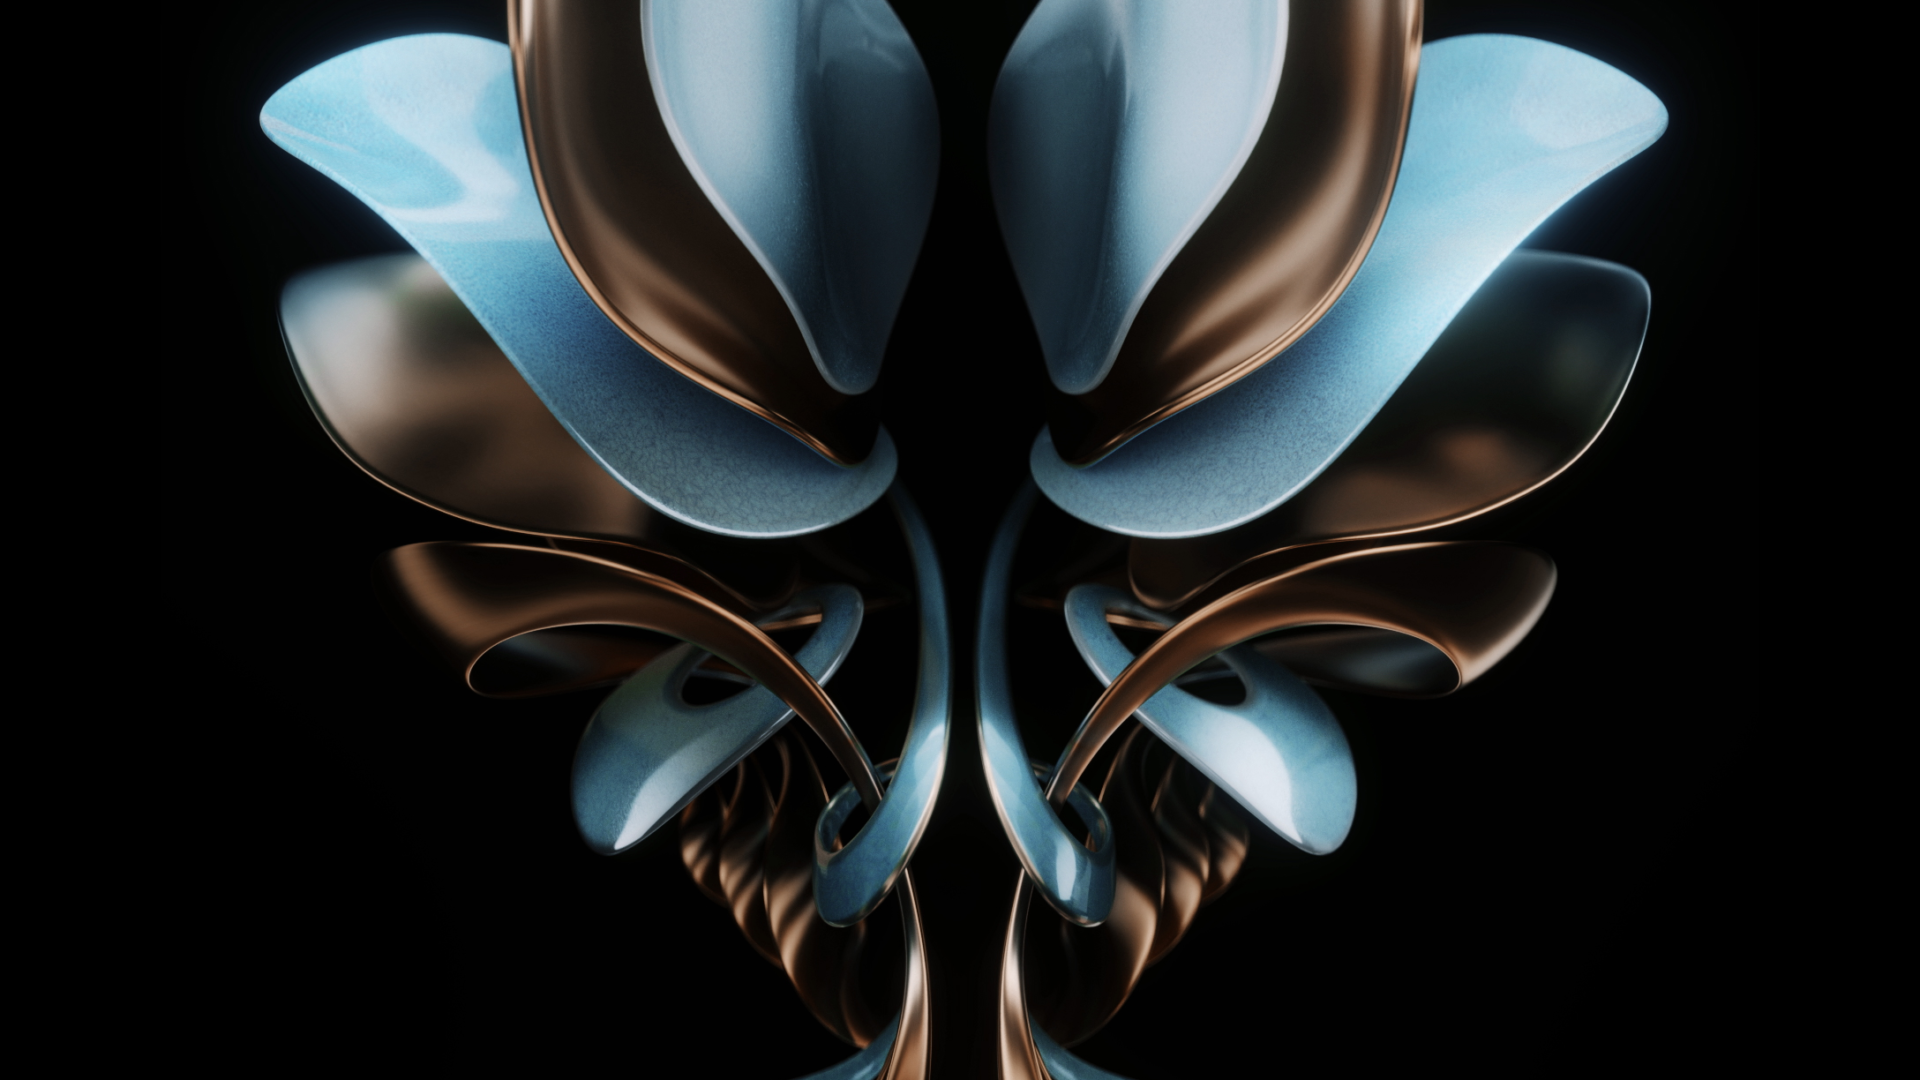 Galaxy Fold 4 - Samsung Store wallpaper loop - Does any one have this to  share ? : r/GalaxyFold